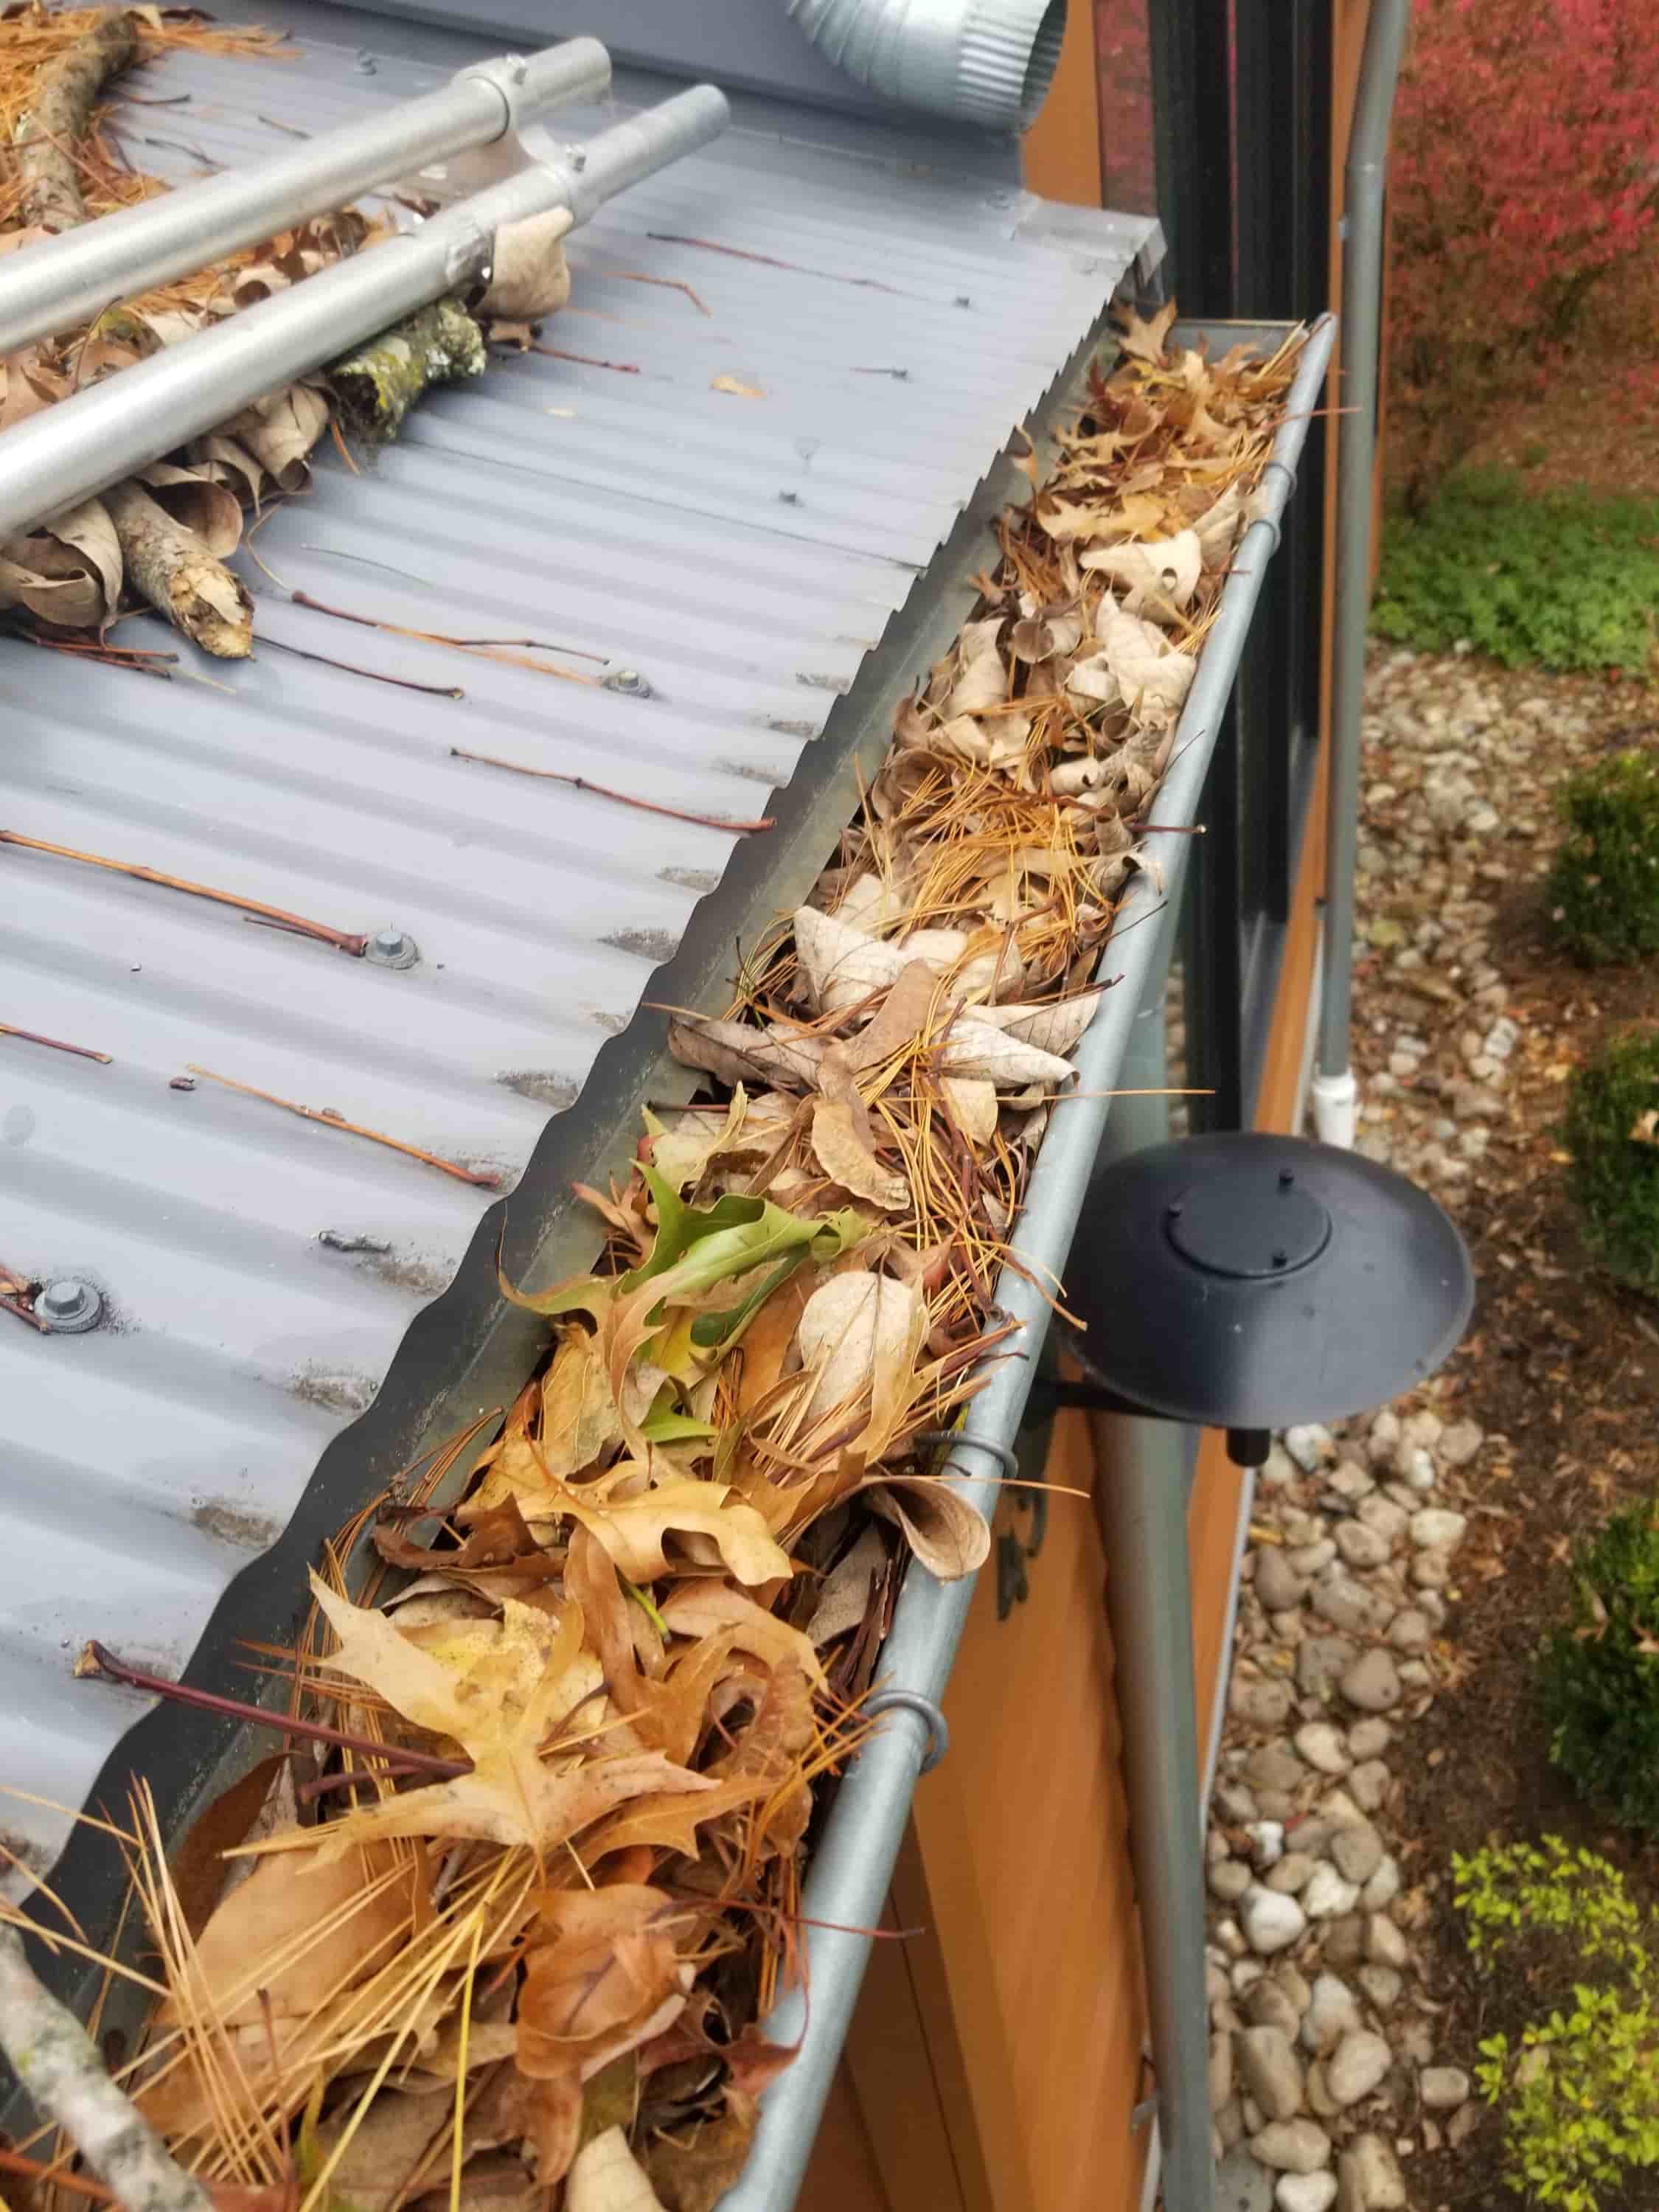 gutter cleaning tools for 3 story house